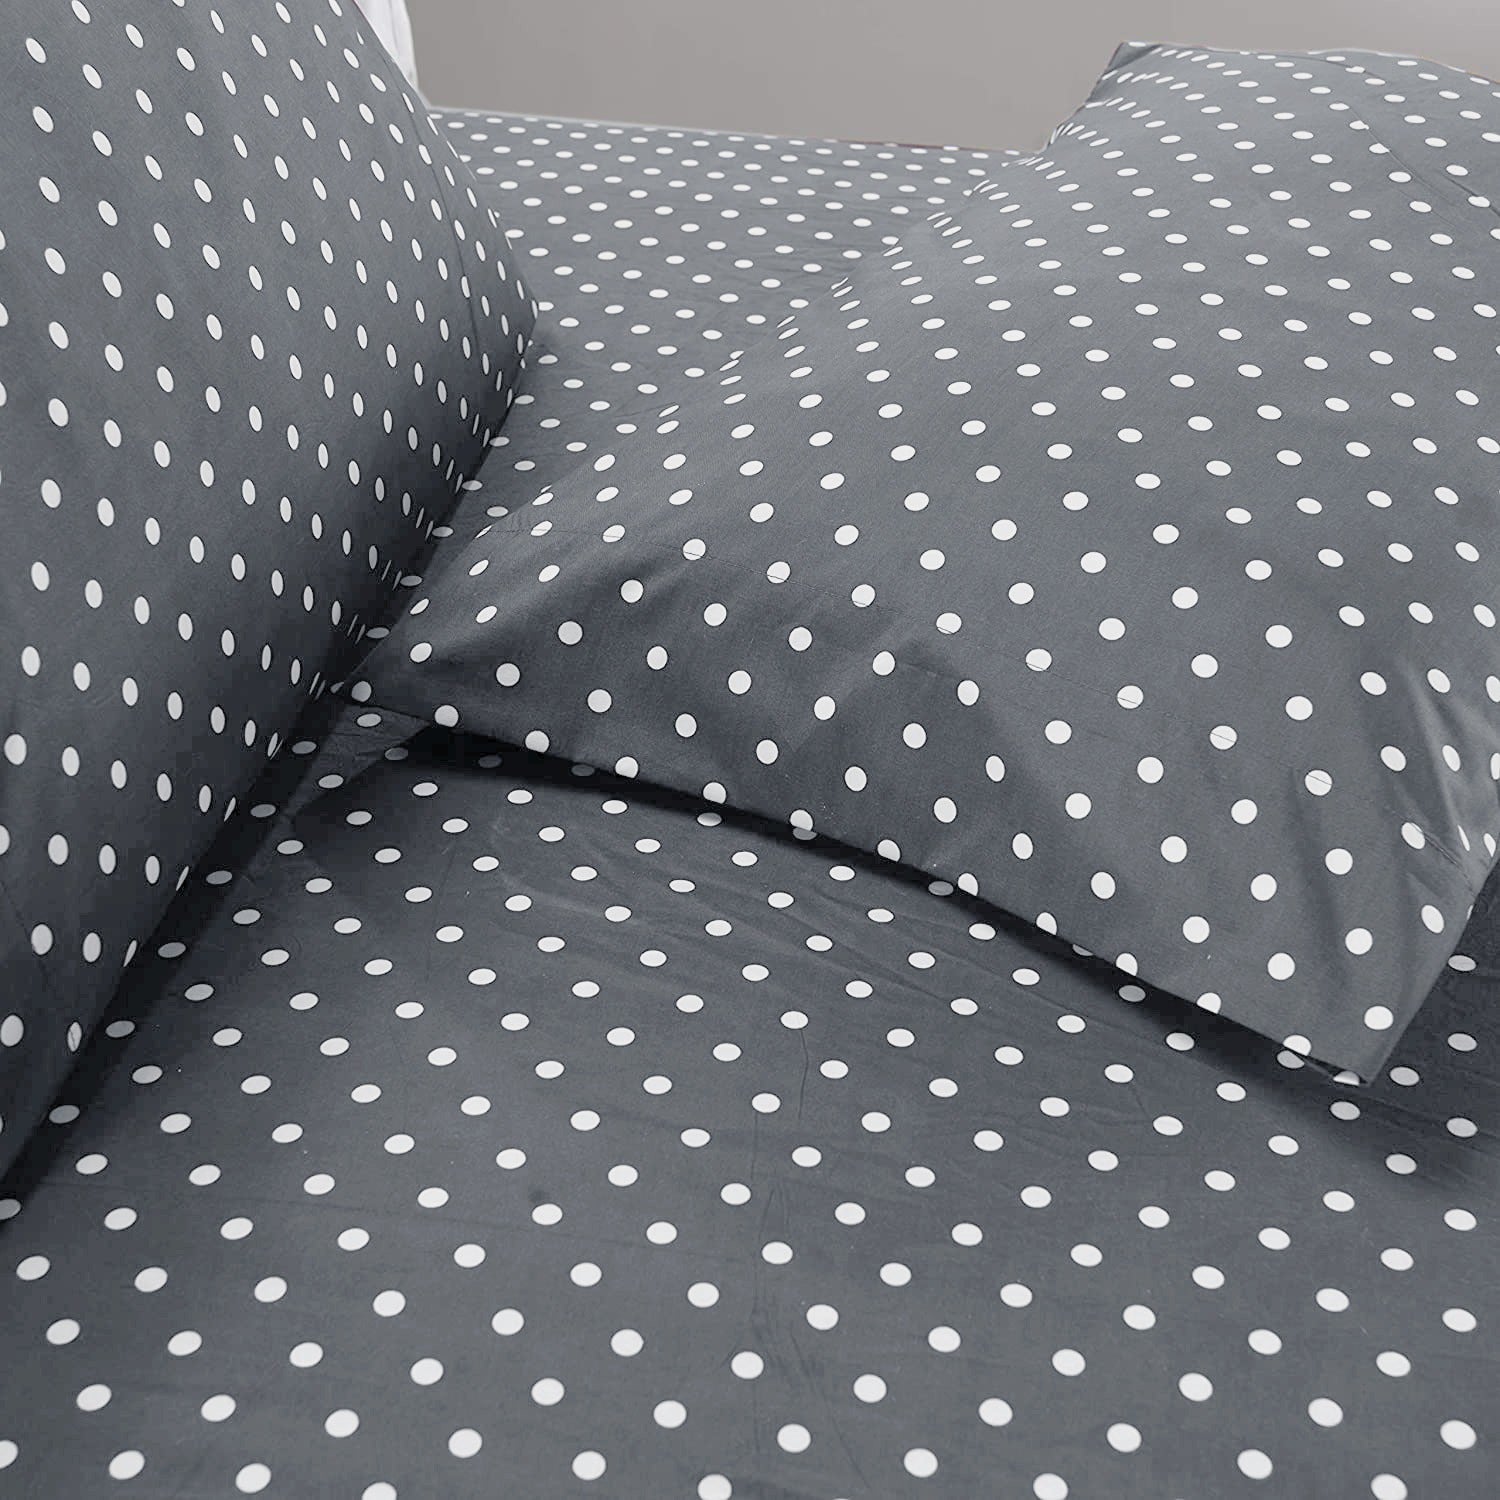 Fitted Bed Sheet-Grey Polka Apricot